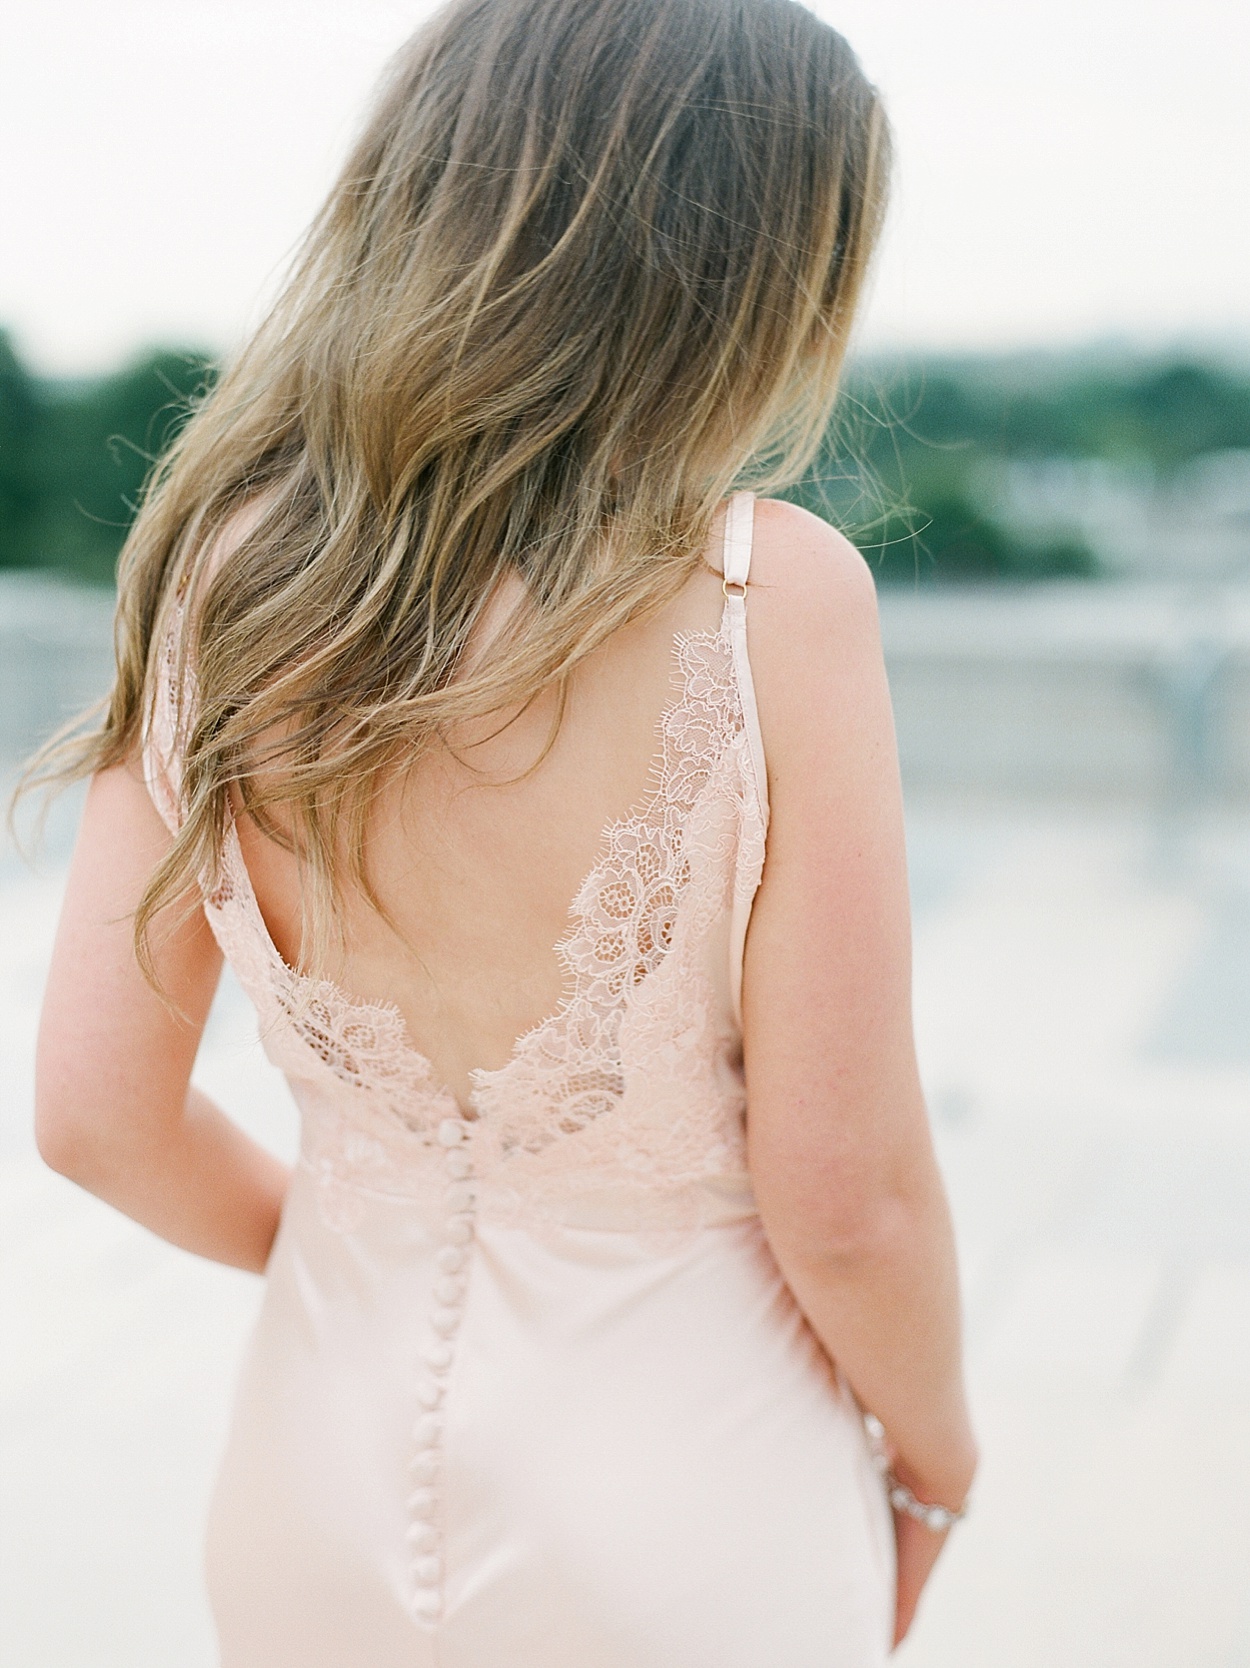 Sunrise portraits at the Eiffel Tower in Paris, France | Abby Grace Photography